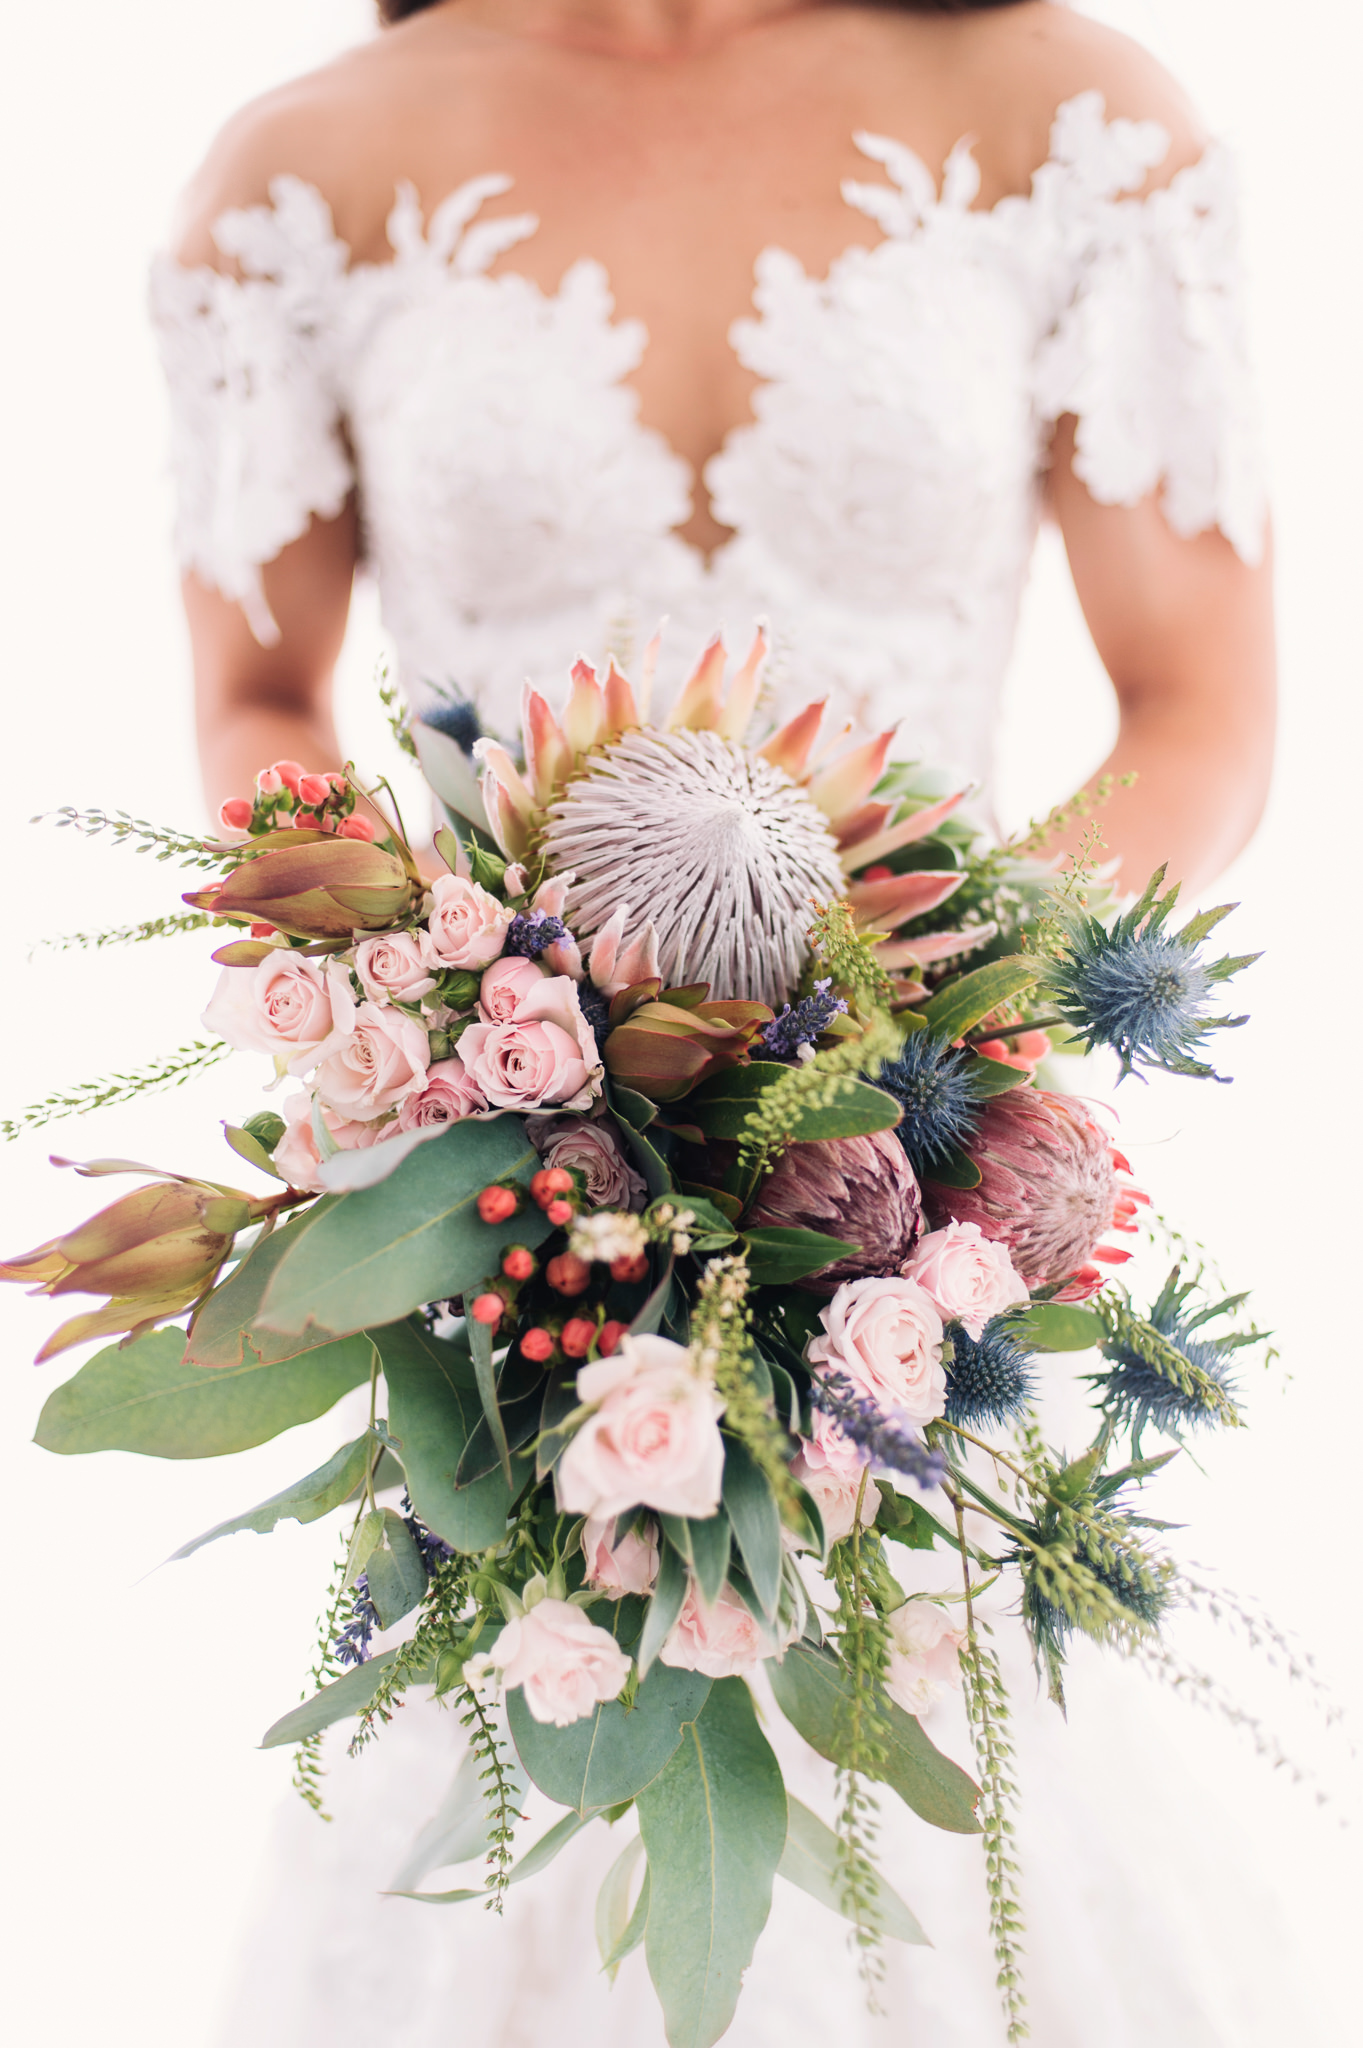  Stunning bouquet by Bek Burrows 